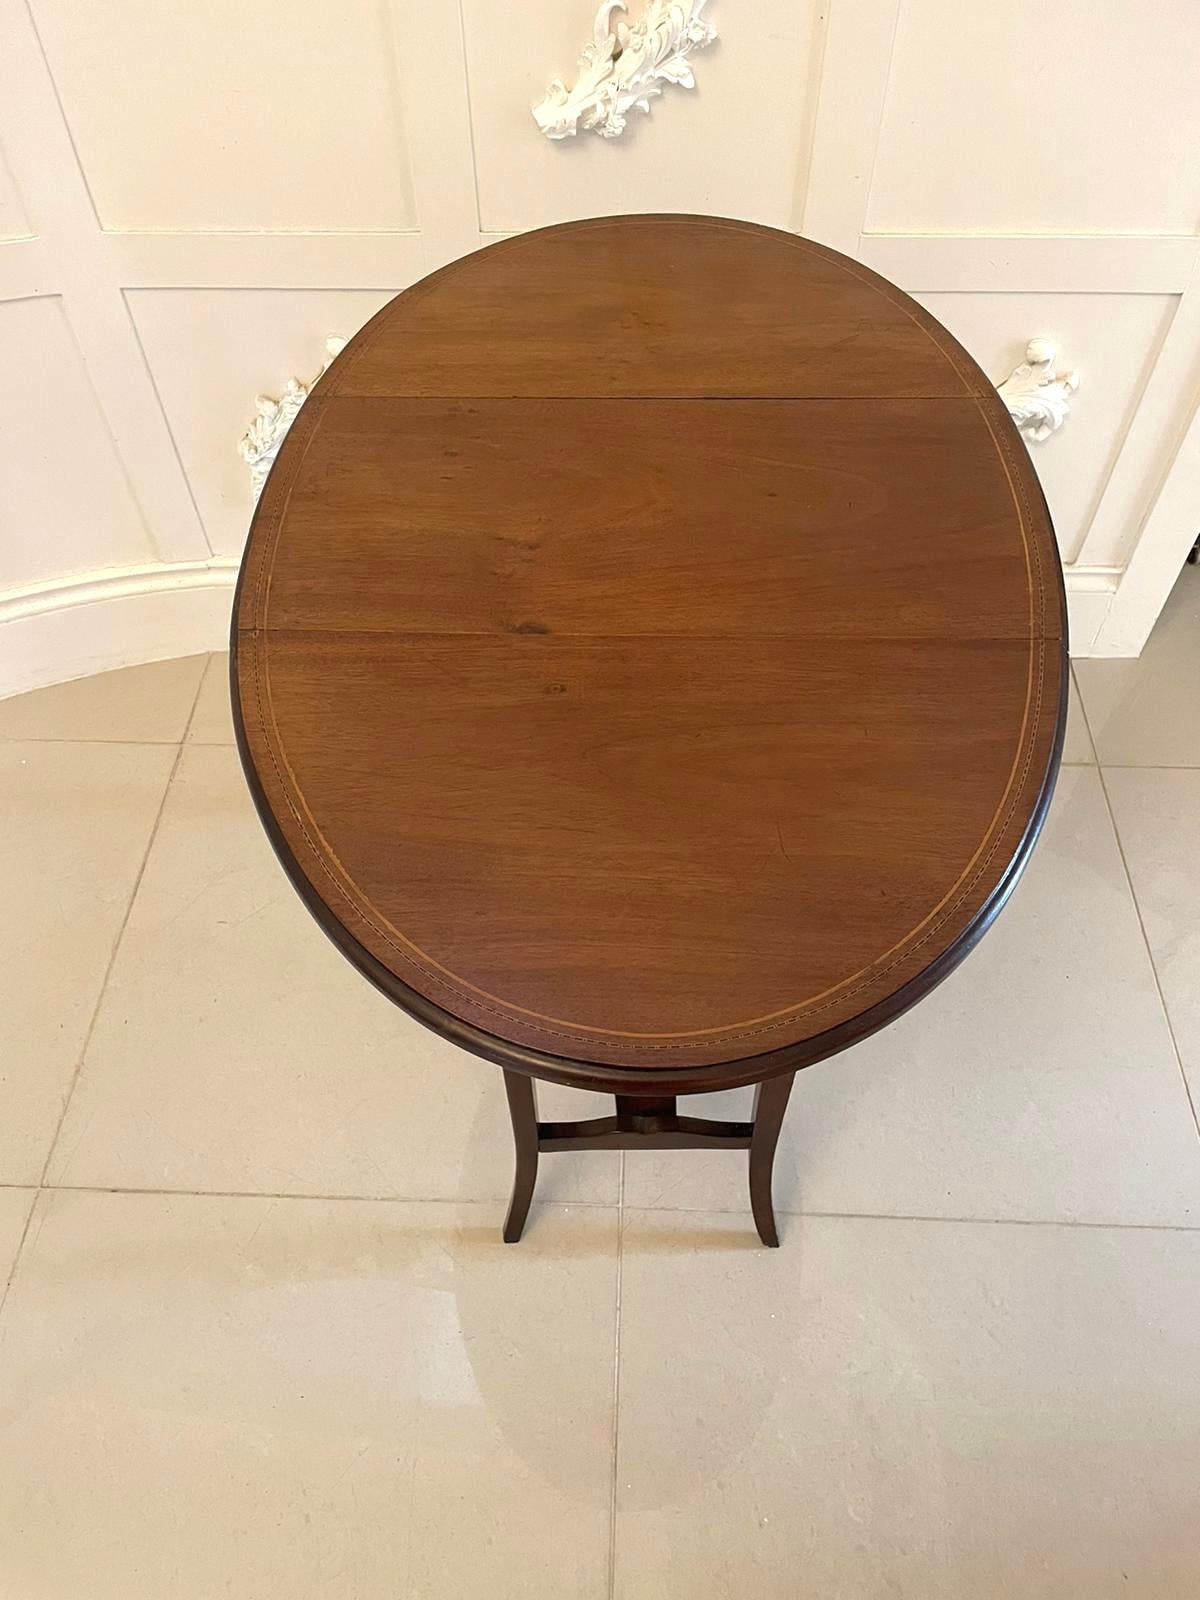 Antique Edwardian quality mahogany inlaid lamp table having a quality mahogany inlaid swing round top with two drop leaves and a moulded edge. It stands on four square tapering shaped mahogany legs united by a shaped mahogany undertier.

A